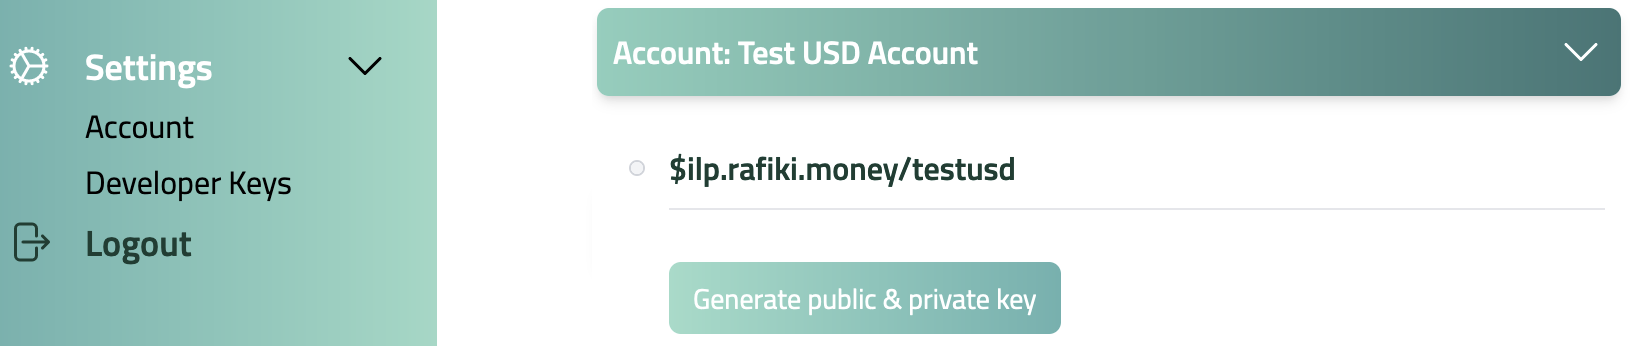 Expanded account showing payment pointer and Generate public & private key button